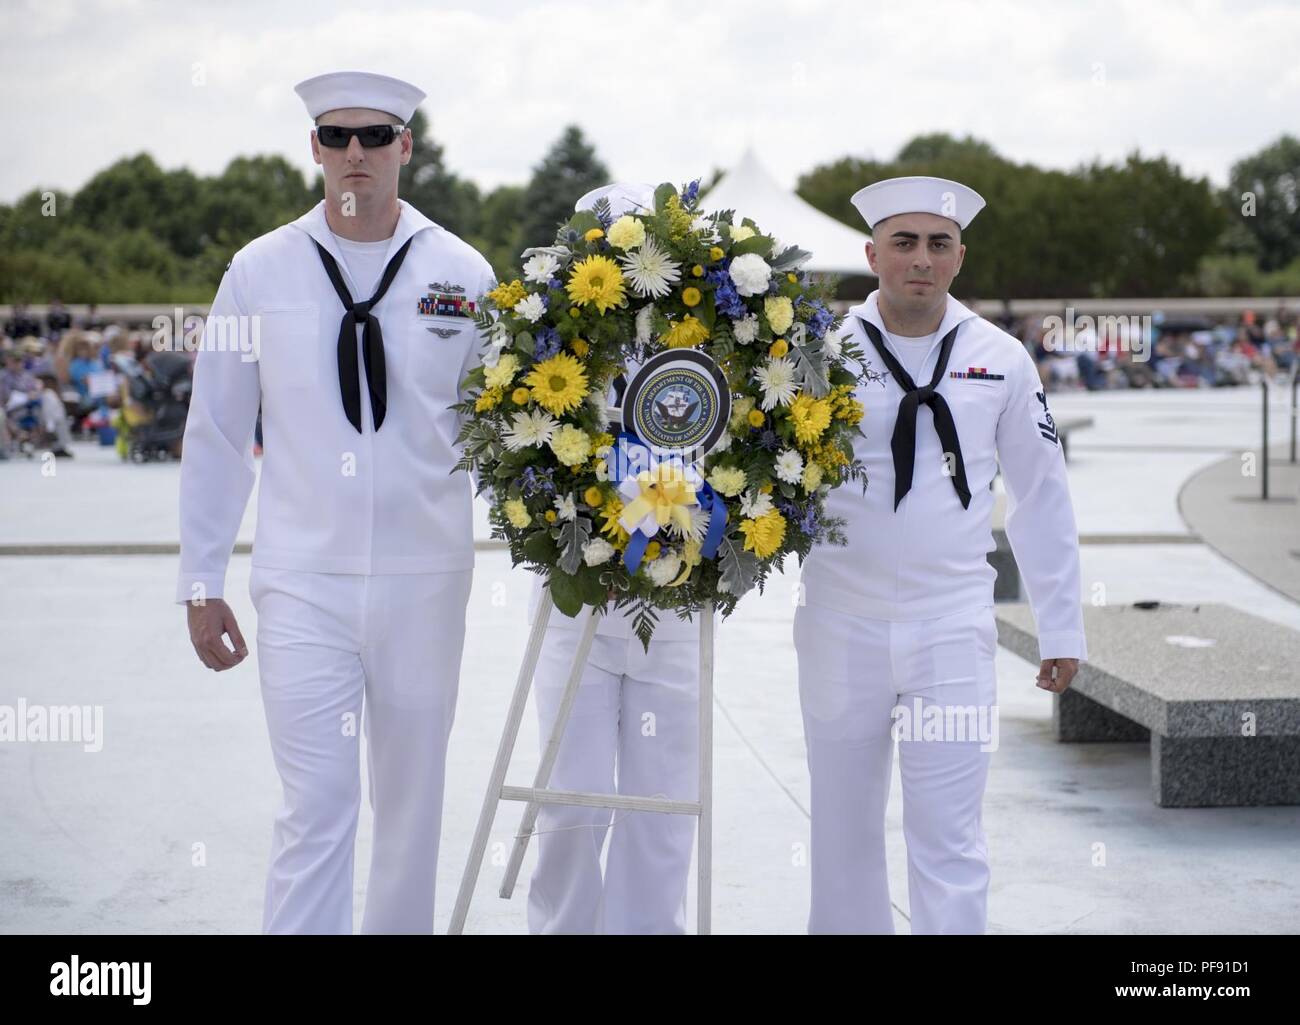 Va.  (June 6, 2018) Sailors assigned to Assault Craft Unit (ACU) 2 present a wreath to be laid during the 74th D-Day commemoration ceremony at the National D-Day Memorial. The Memorial resides in Bedford, Va., the town that suffered the highest per-capita loss of lives in the D-Day invasion over any community in the allied forces. Stock Photo